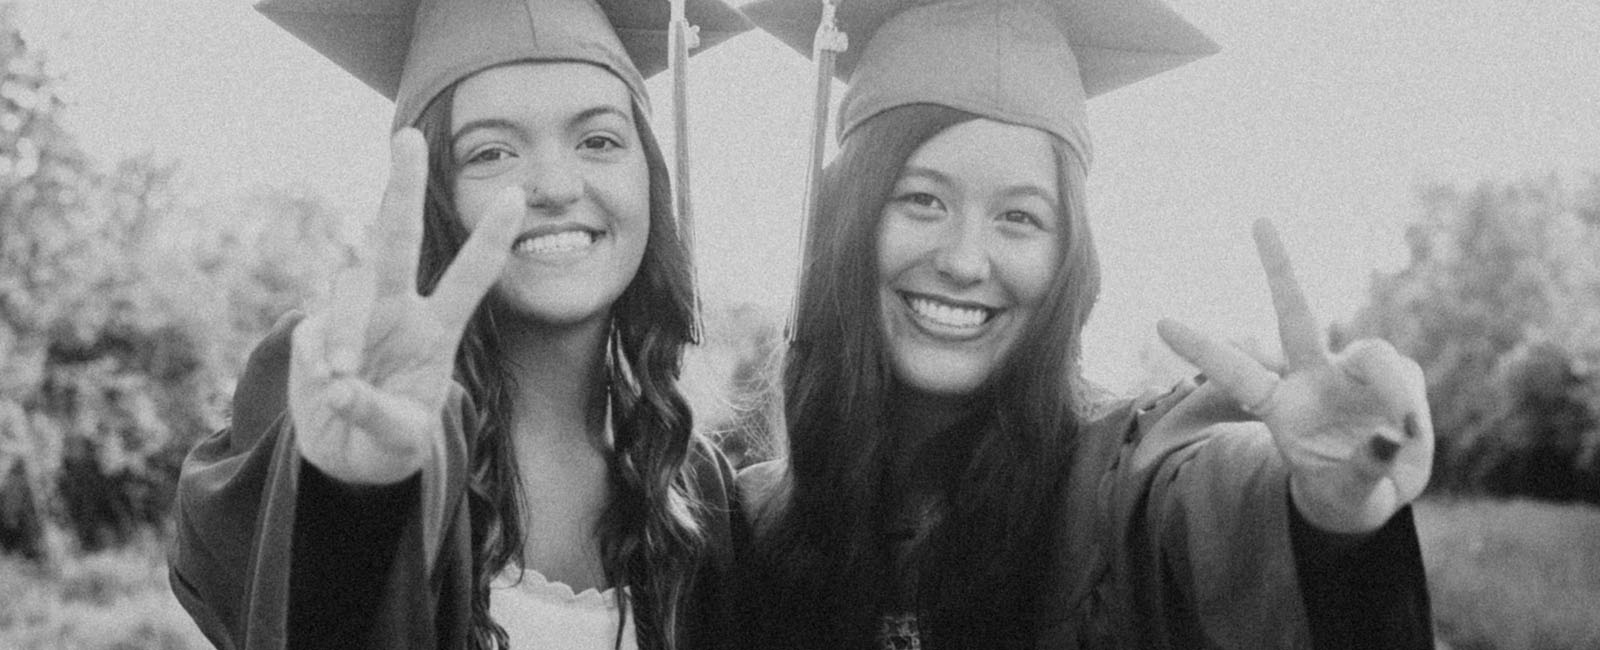 high school graduation with senior girls and their hats